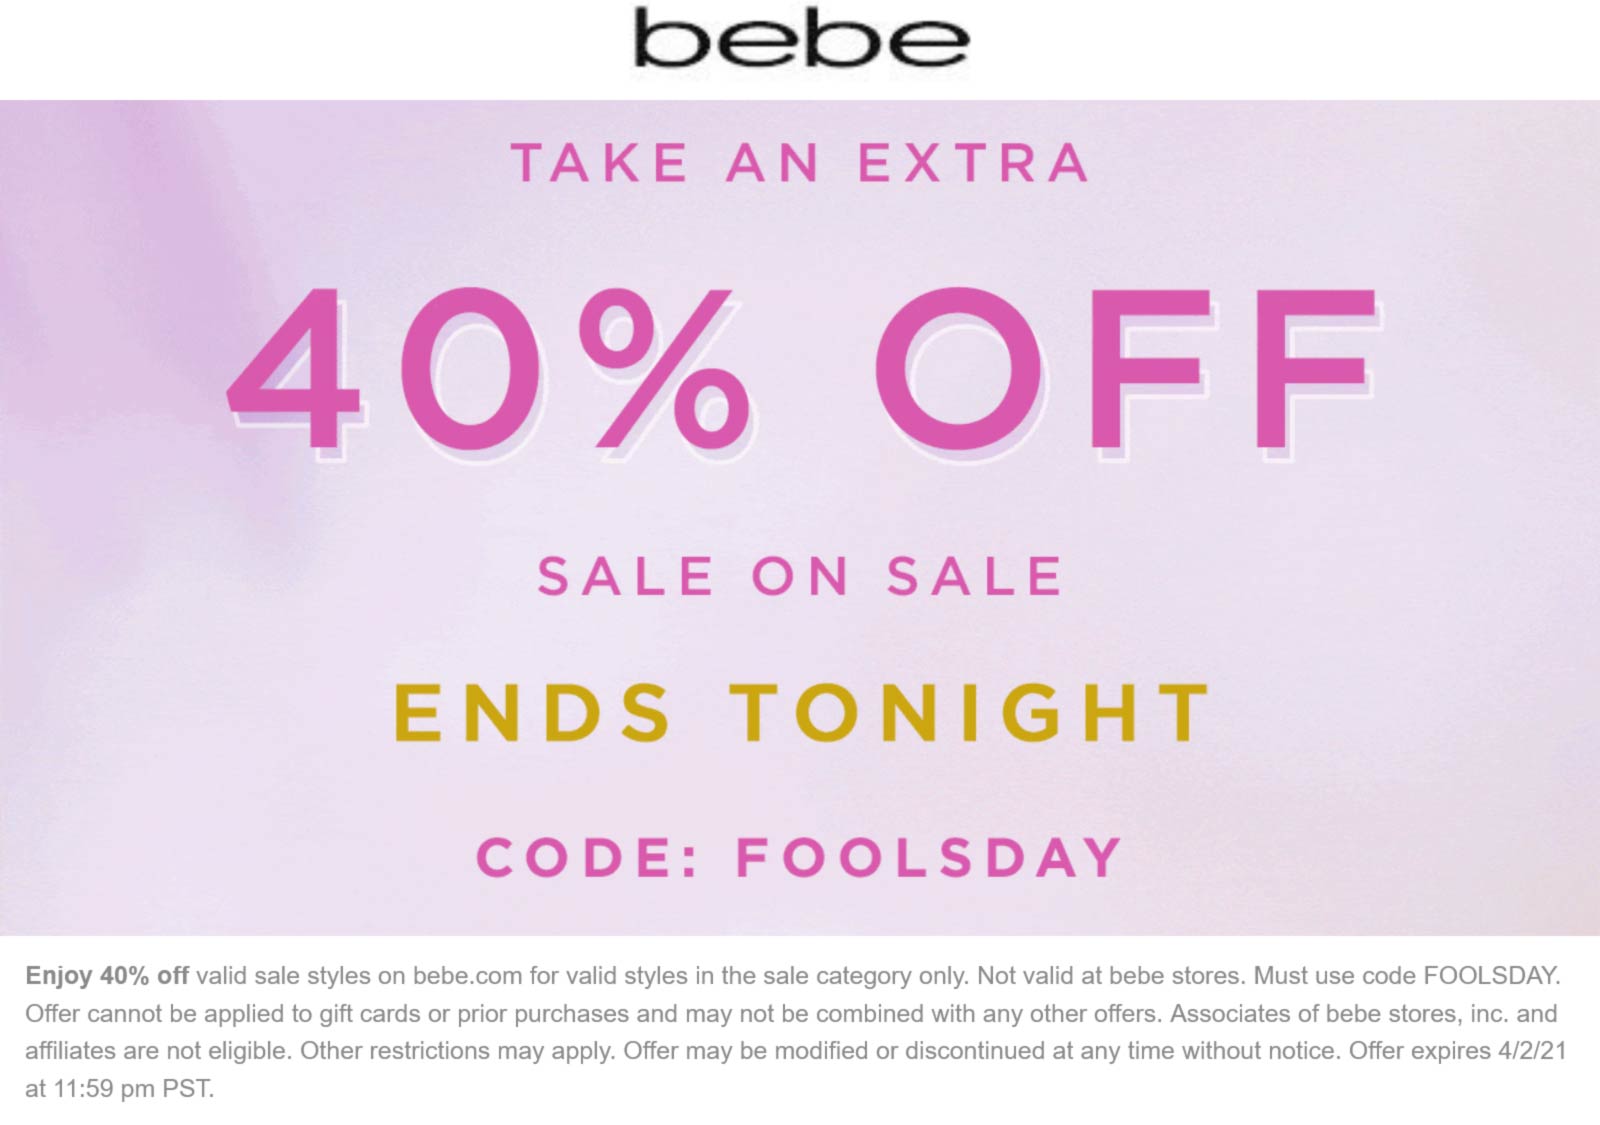 bebe stores Coupon  Extra 40% off sale items online today at bebe via promo code FOOLSDAY #bebe 